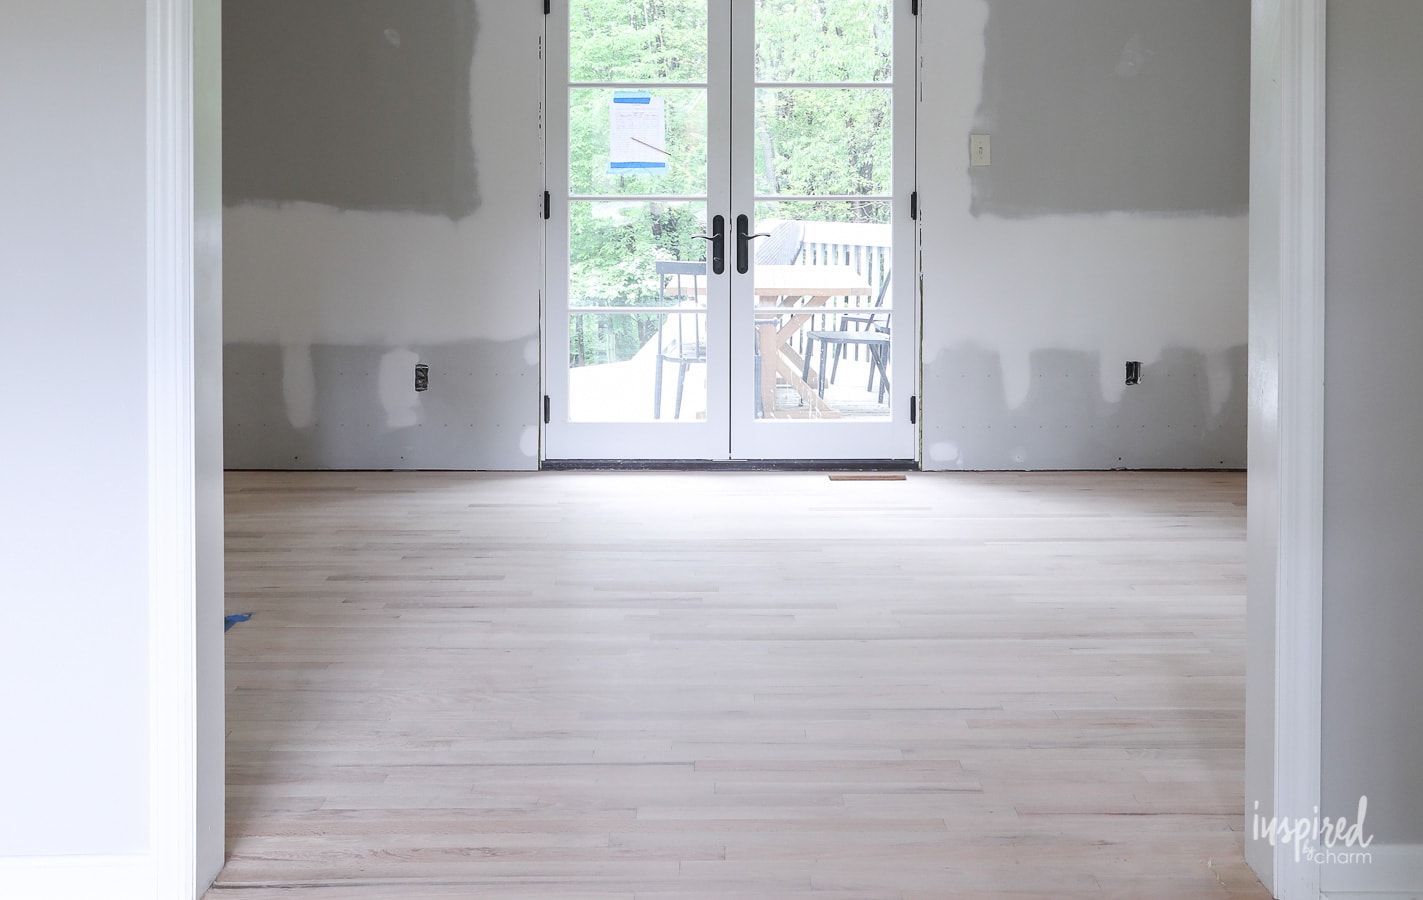 Bayberry Kitchen Update: Drywall and Hardwood #remodel #kitchen #hardwoodfloors #drywall